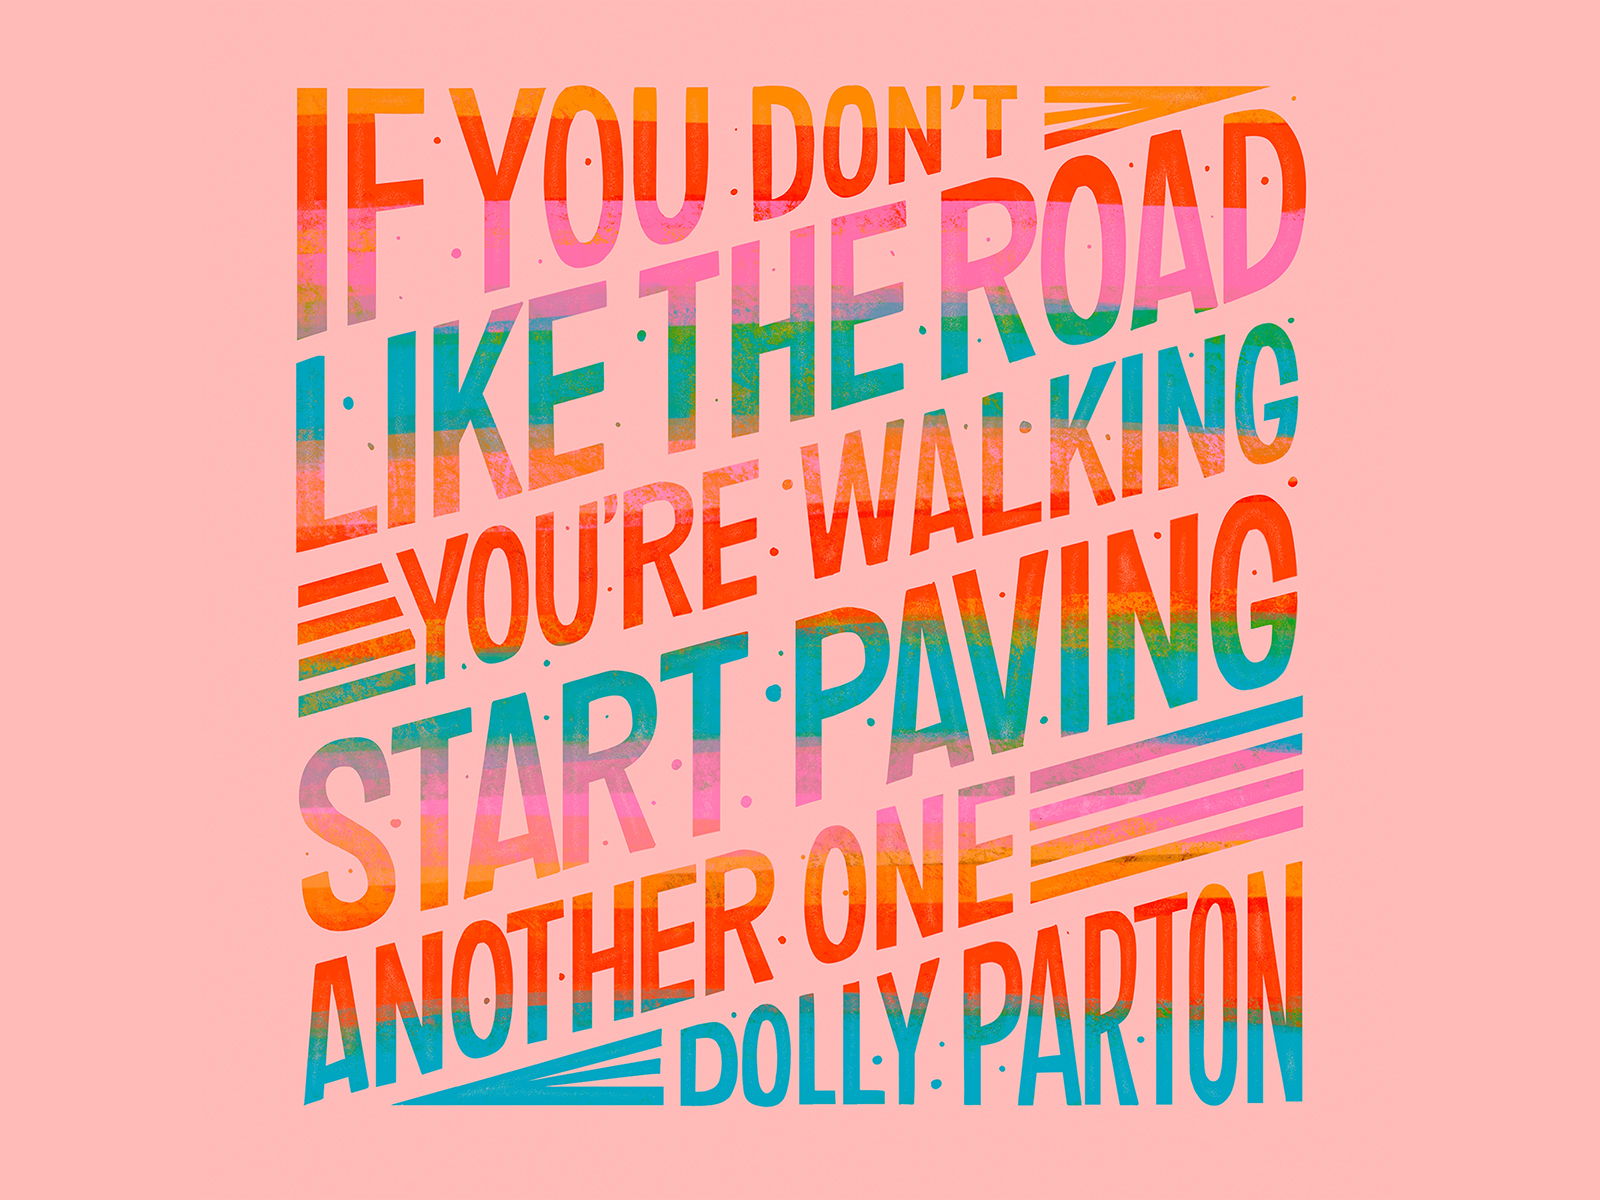 Dolly Parton Quotes Her Funniest and Most Inspiring Sayings